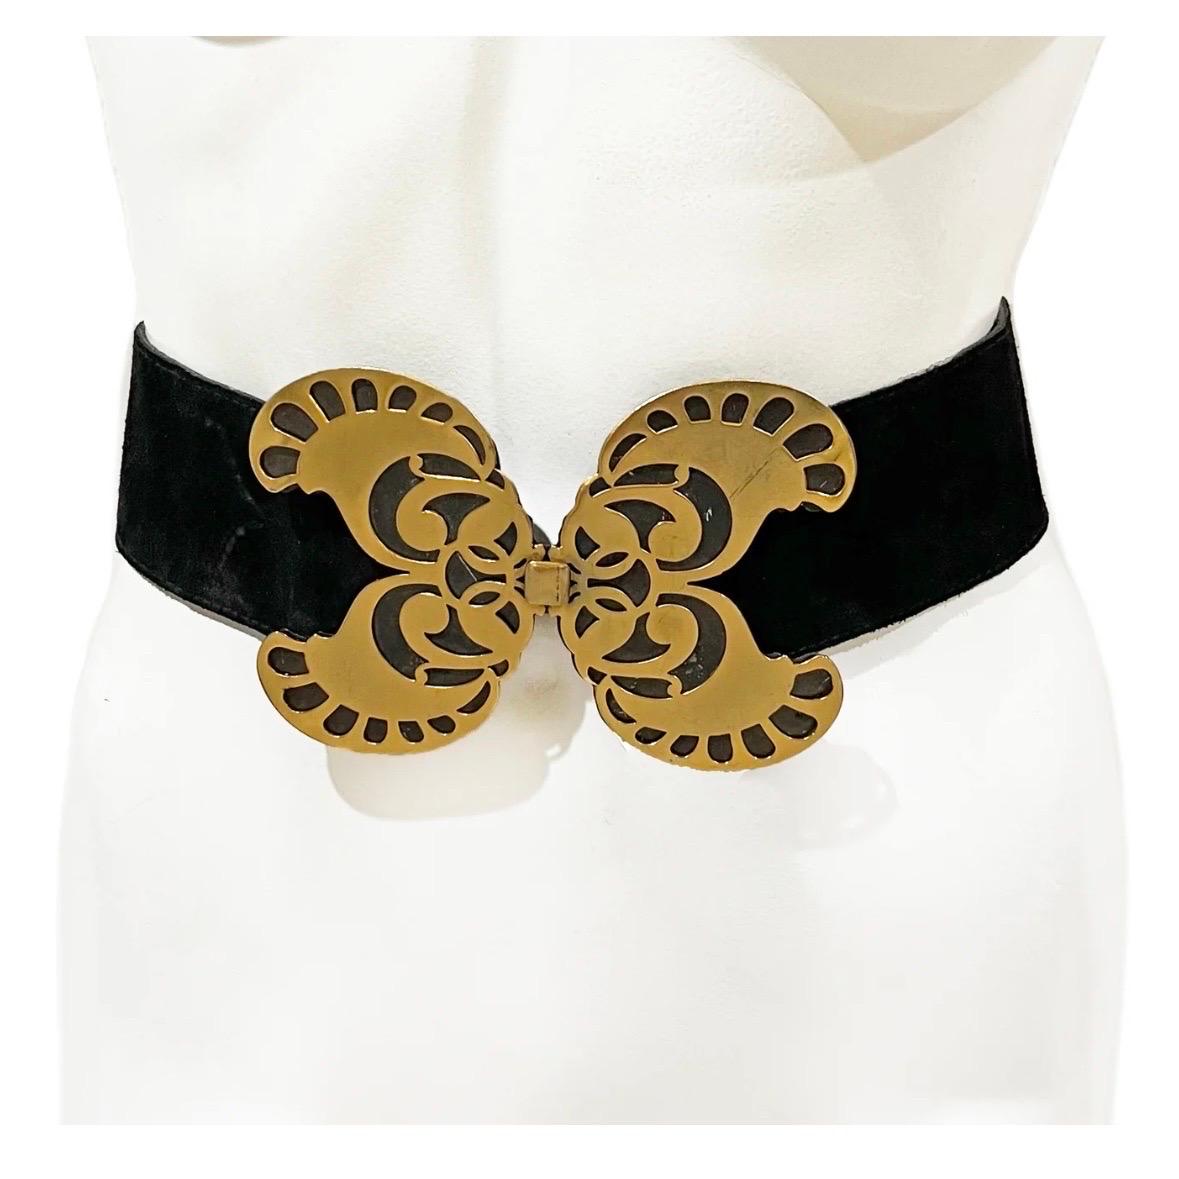 Vintage butterfly belt by Yves Saint Laurent 
1970's 
Made in France 
Black Suede 
Gold tone metal oversized butterfly buckle 
Hook and eye closure 
YSL stamp on the back of buckle, as well as waist band
***SOLD AS IS*** significant leather